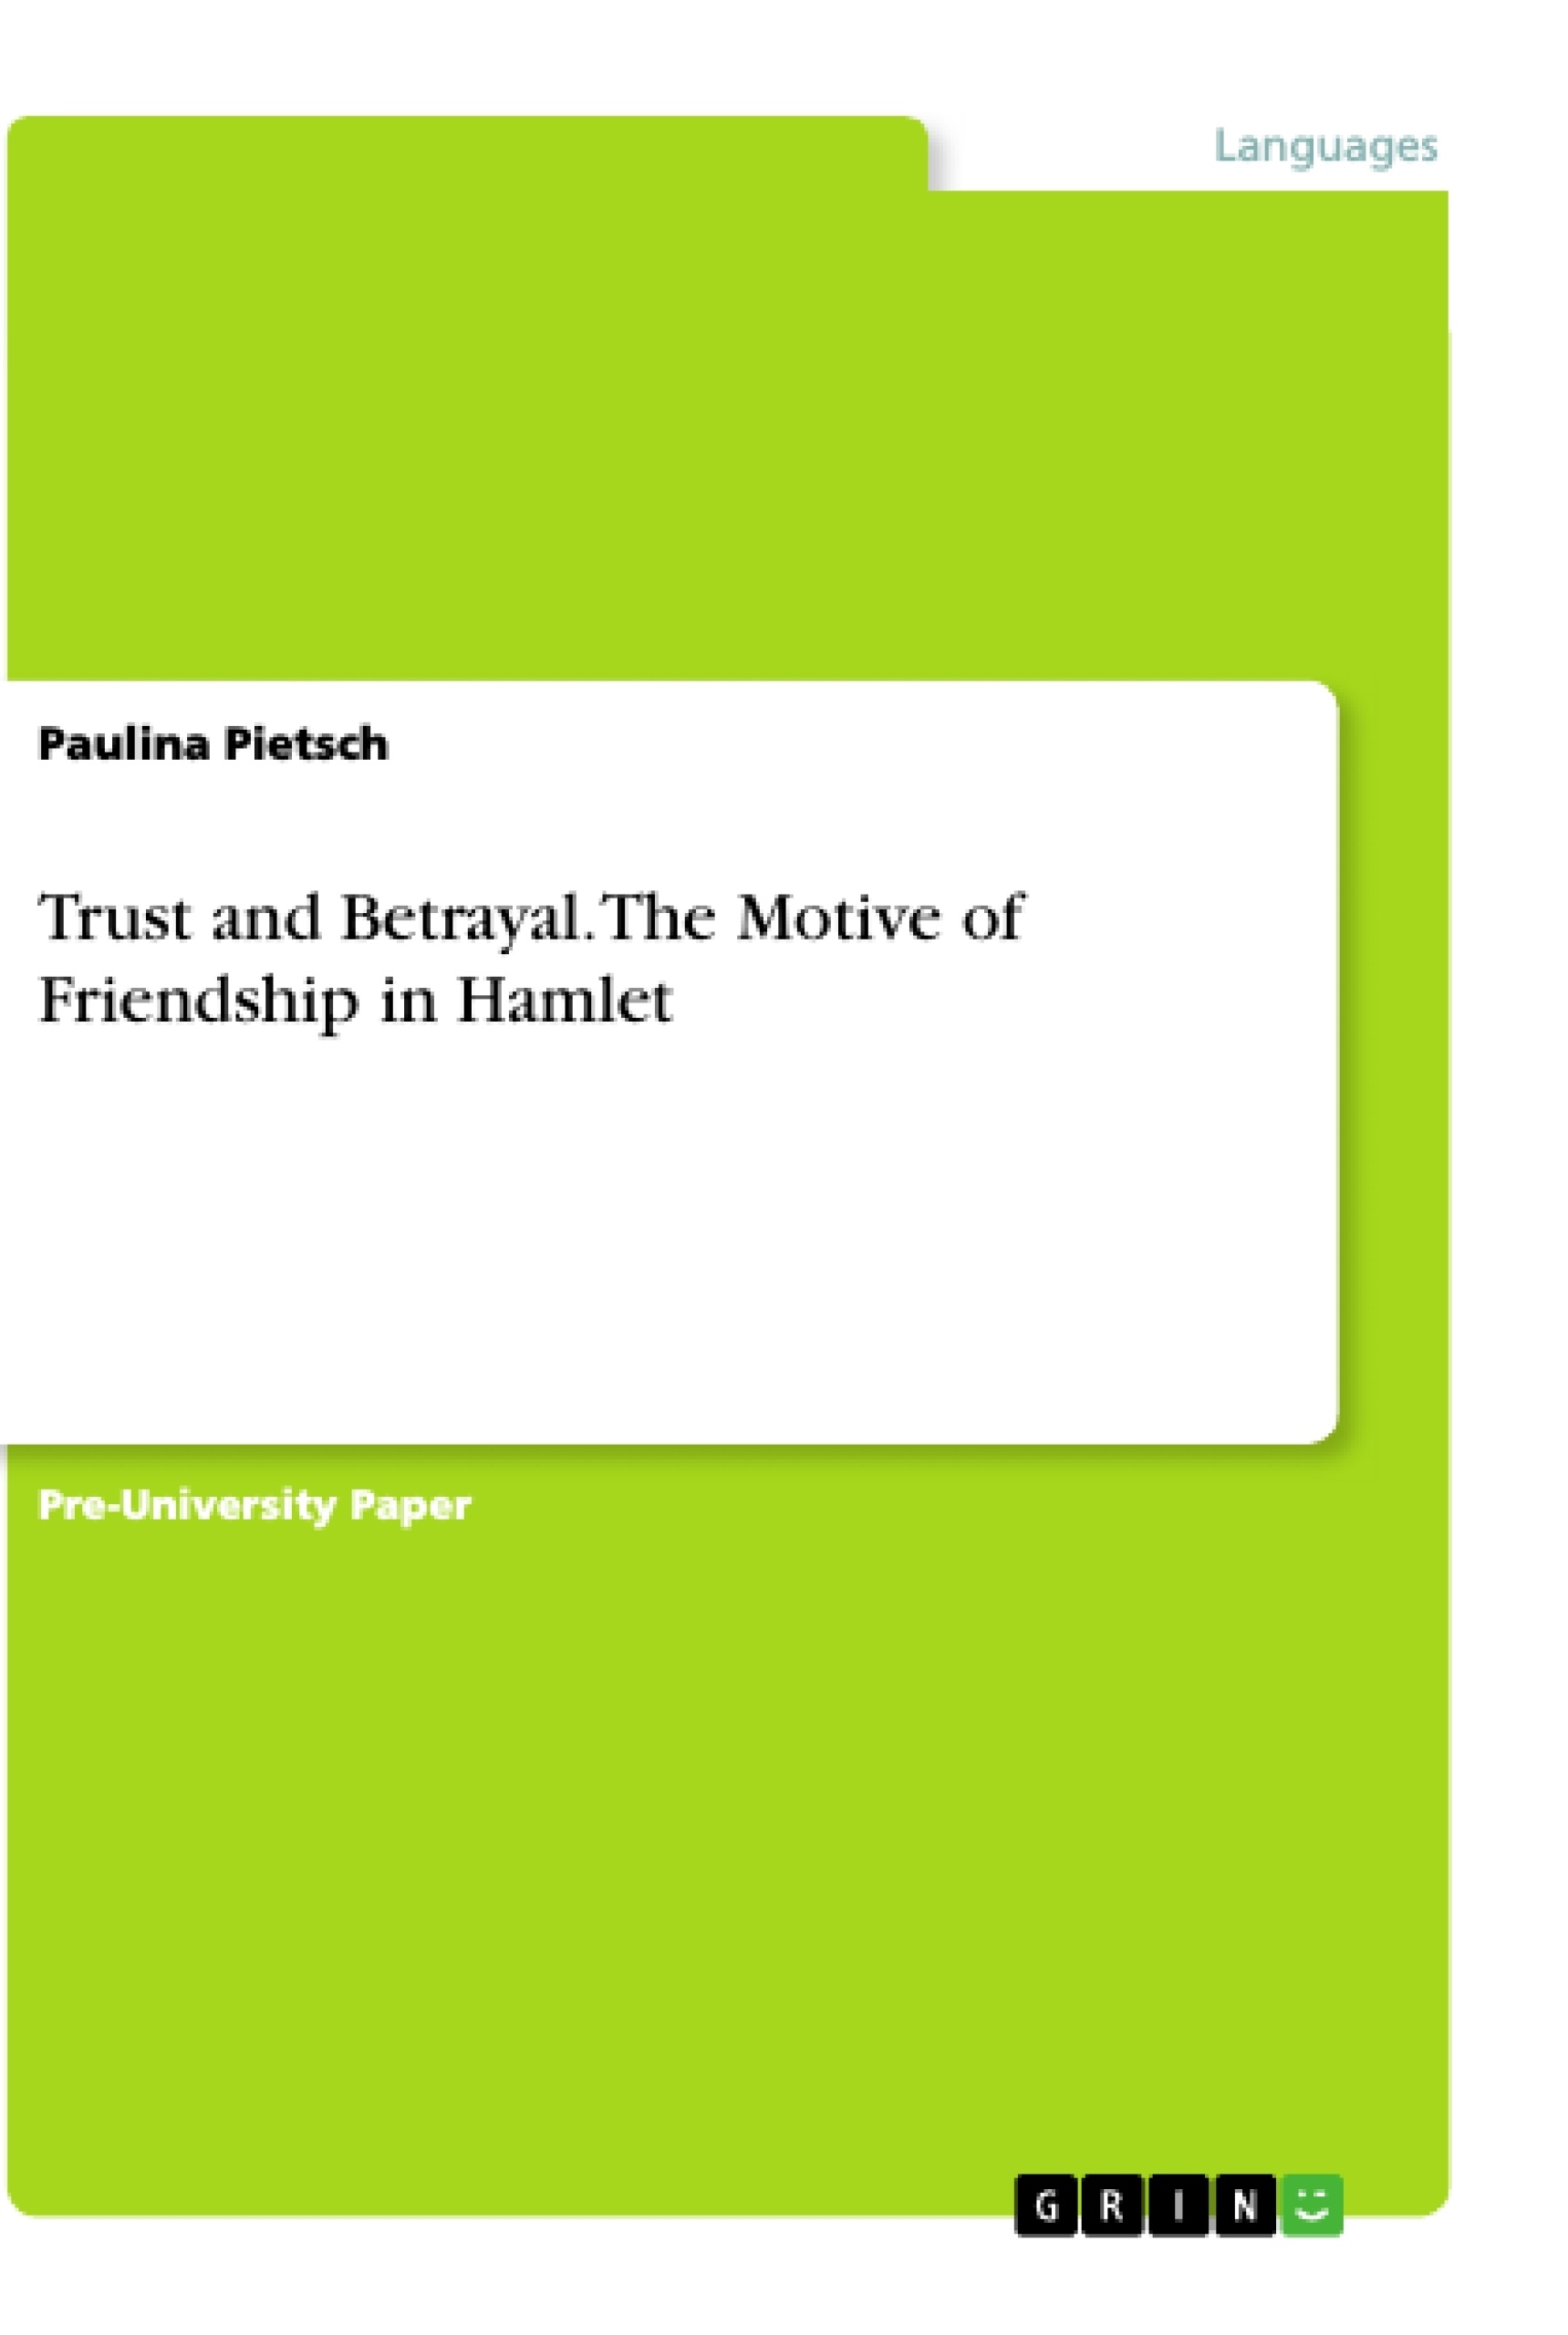 Título: Trust and Betrayal. The Motive of Friendship in Hamlet